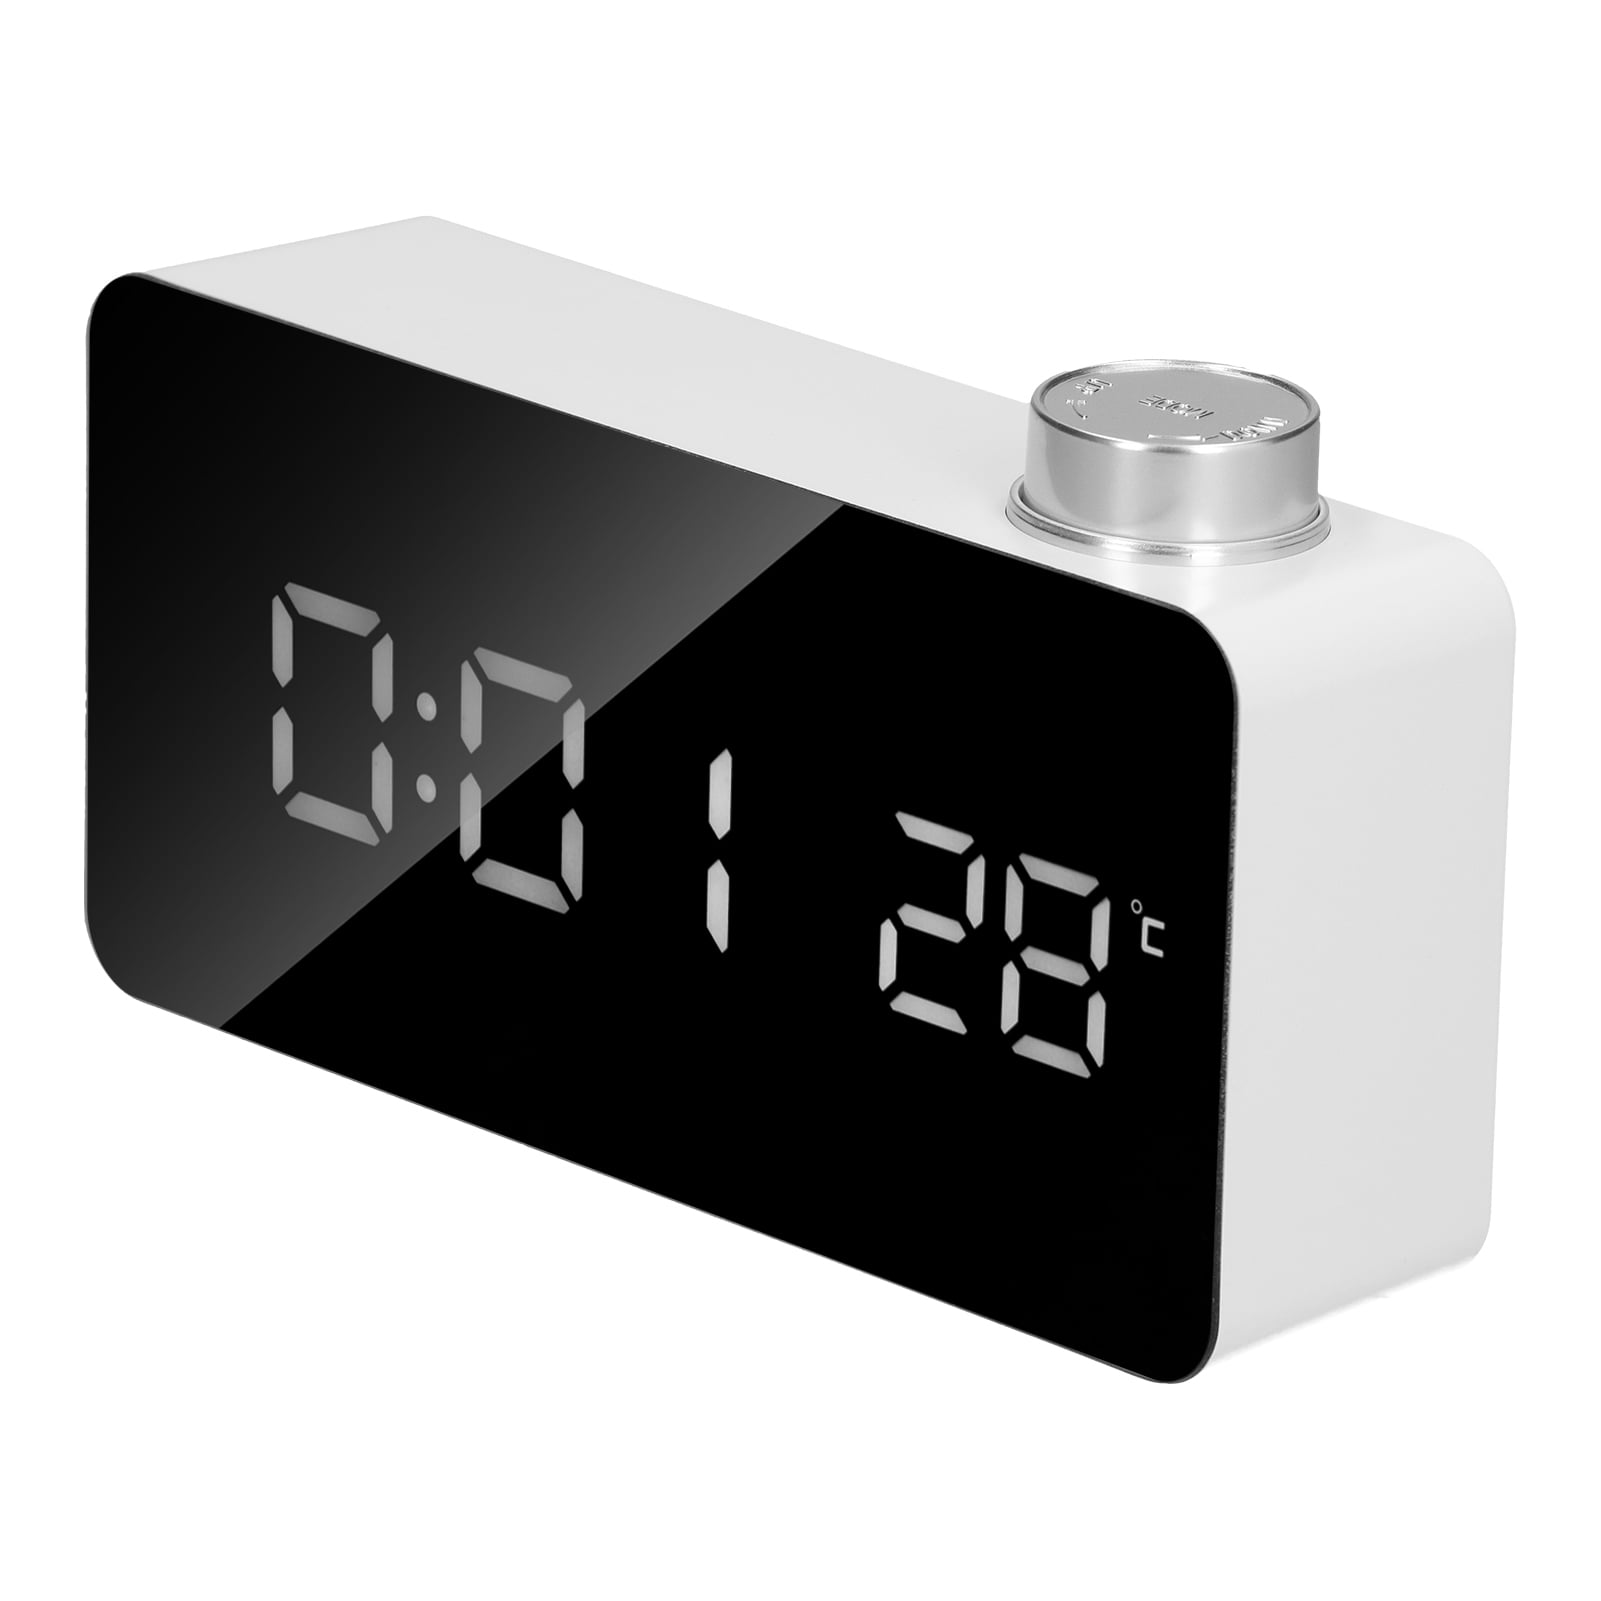 Multifunction LED Digital Alarm Clock Thermometer with Night Mode& Touch Key 